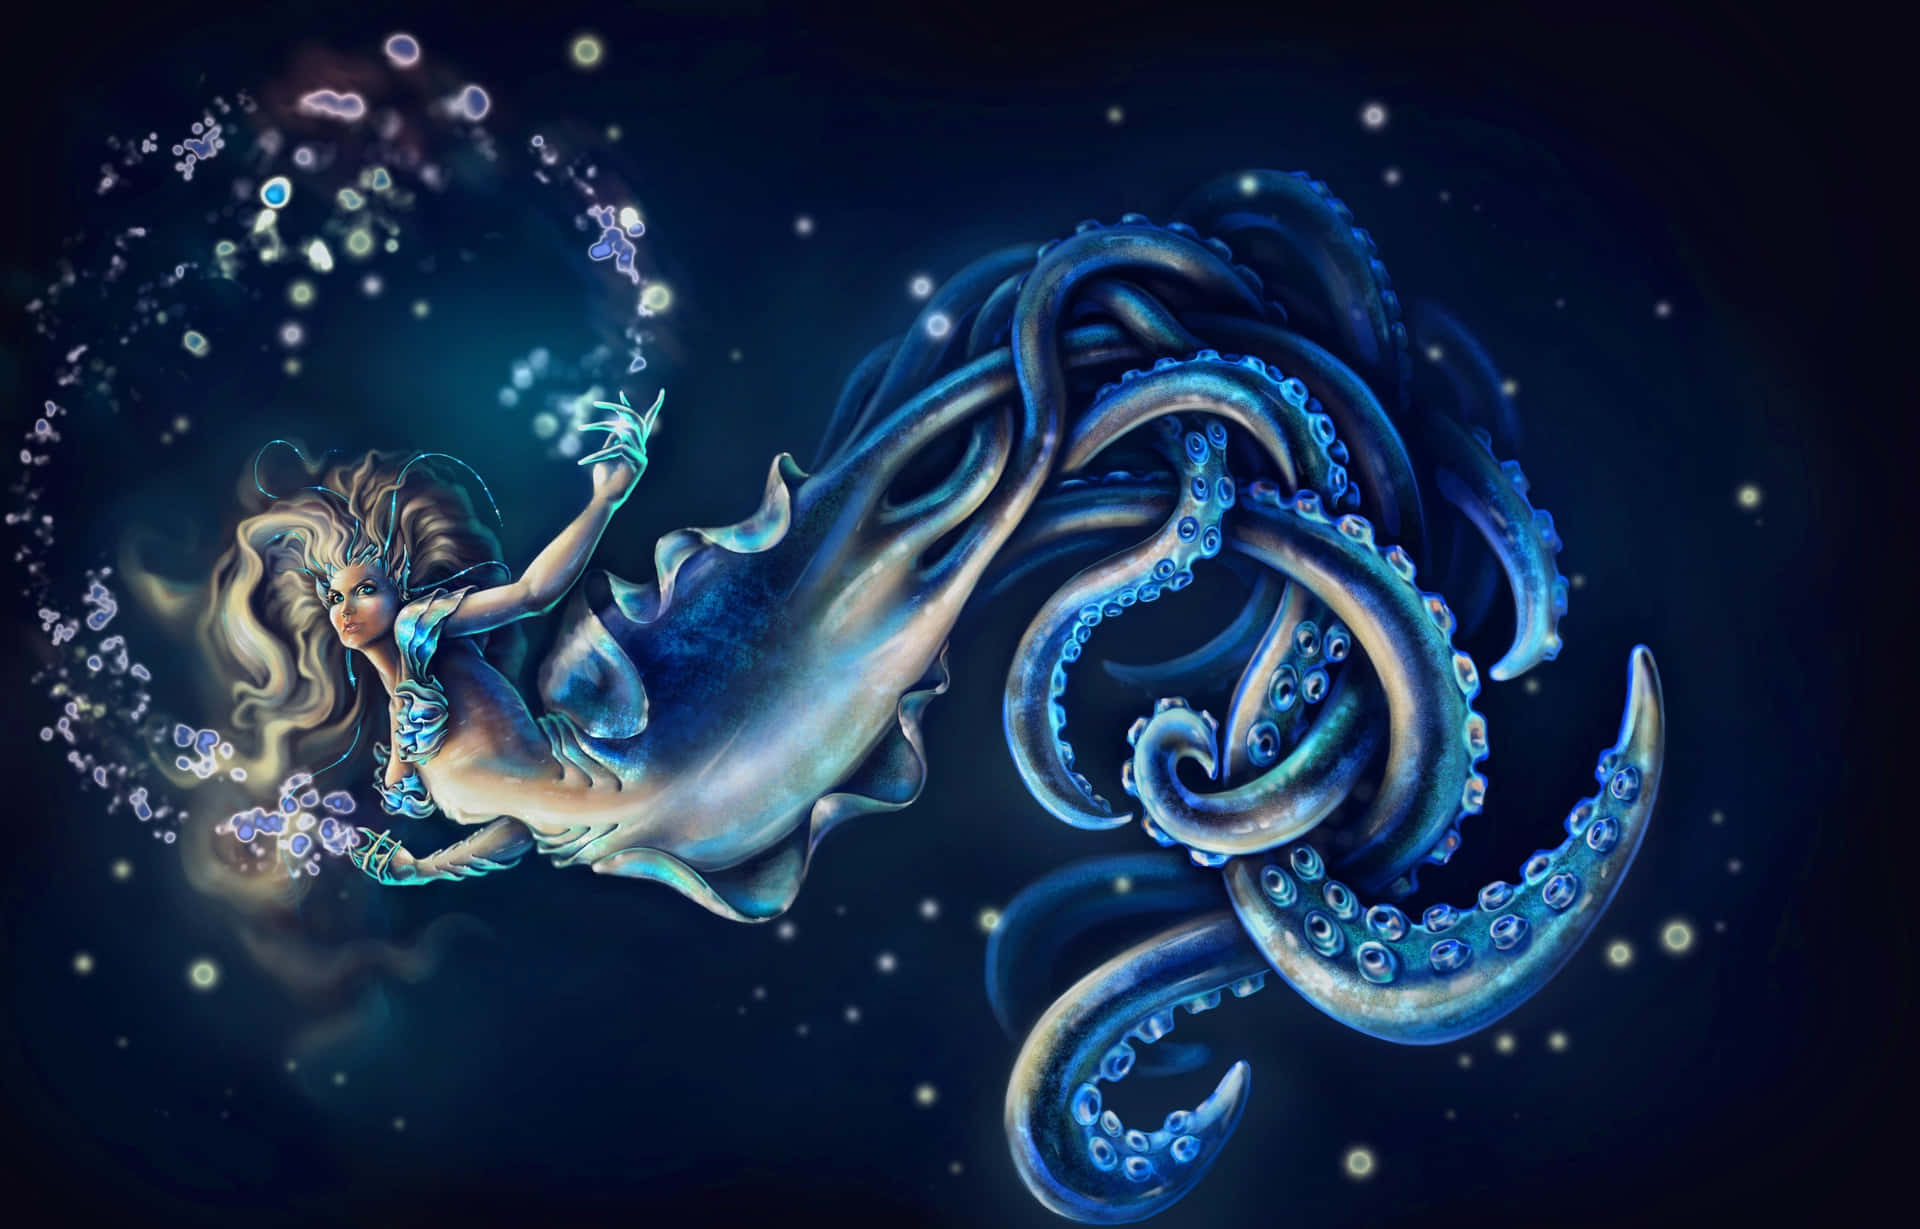 Mermaid With Octopus Tail Wallpaper